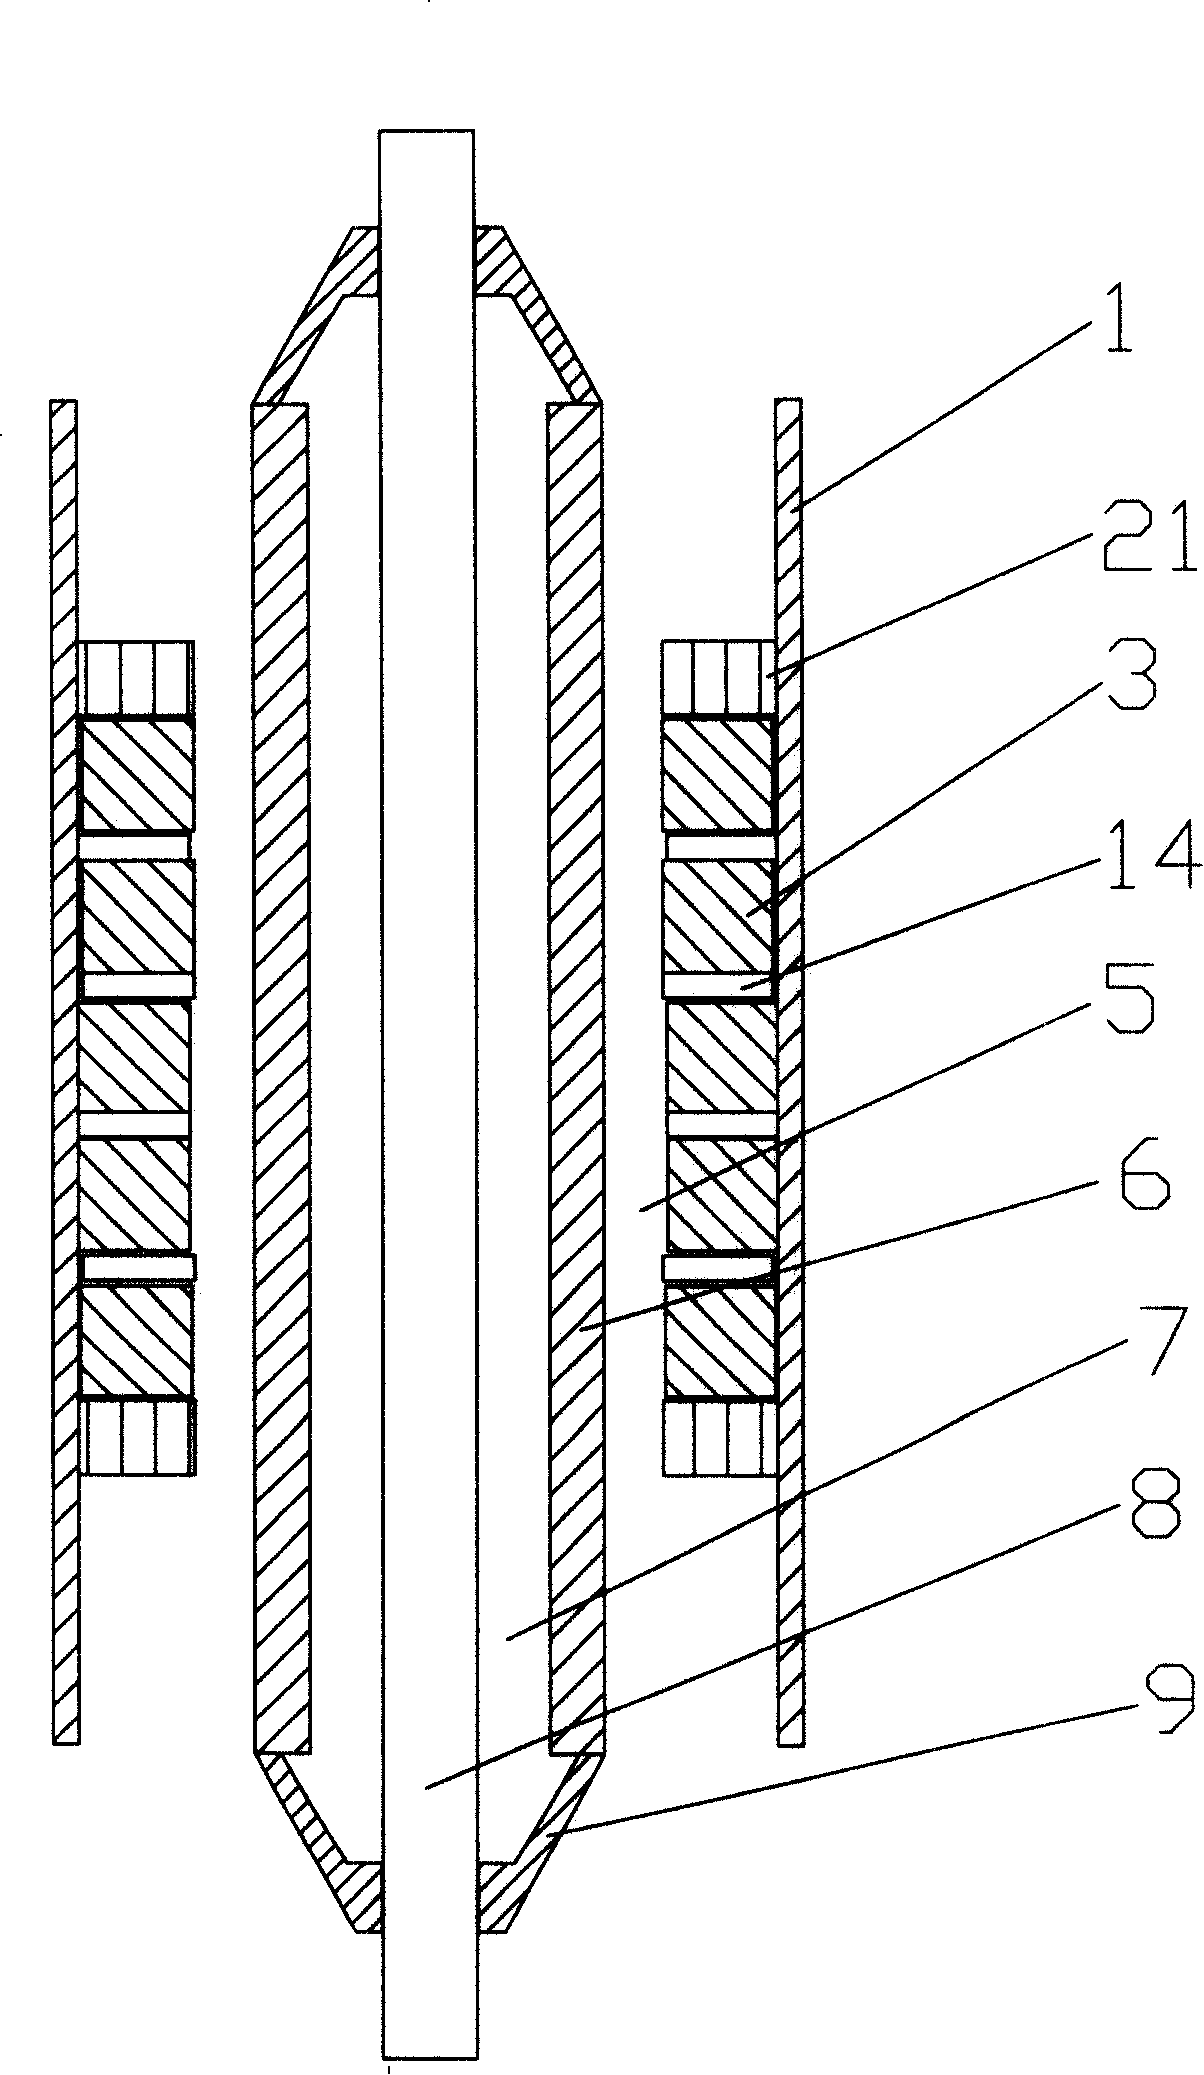 Magnetic-heat wax preventing device for oil production